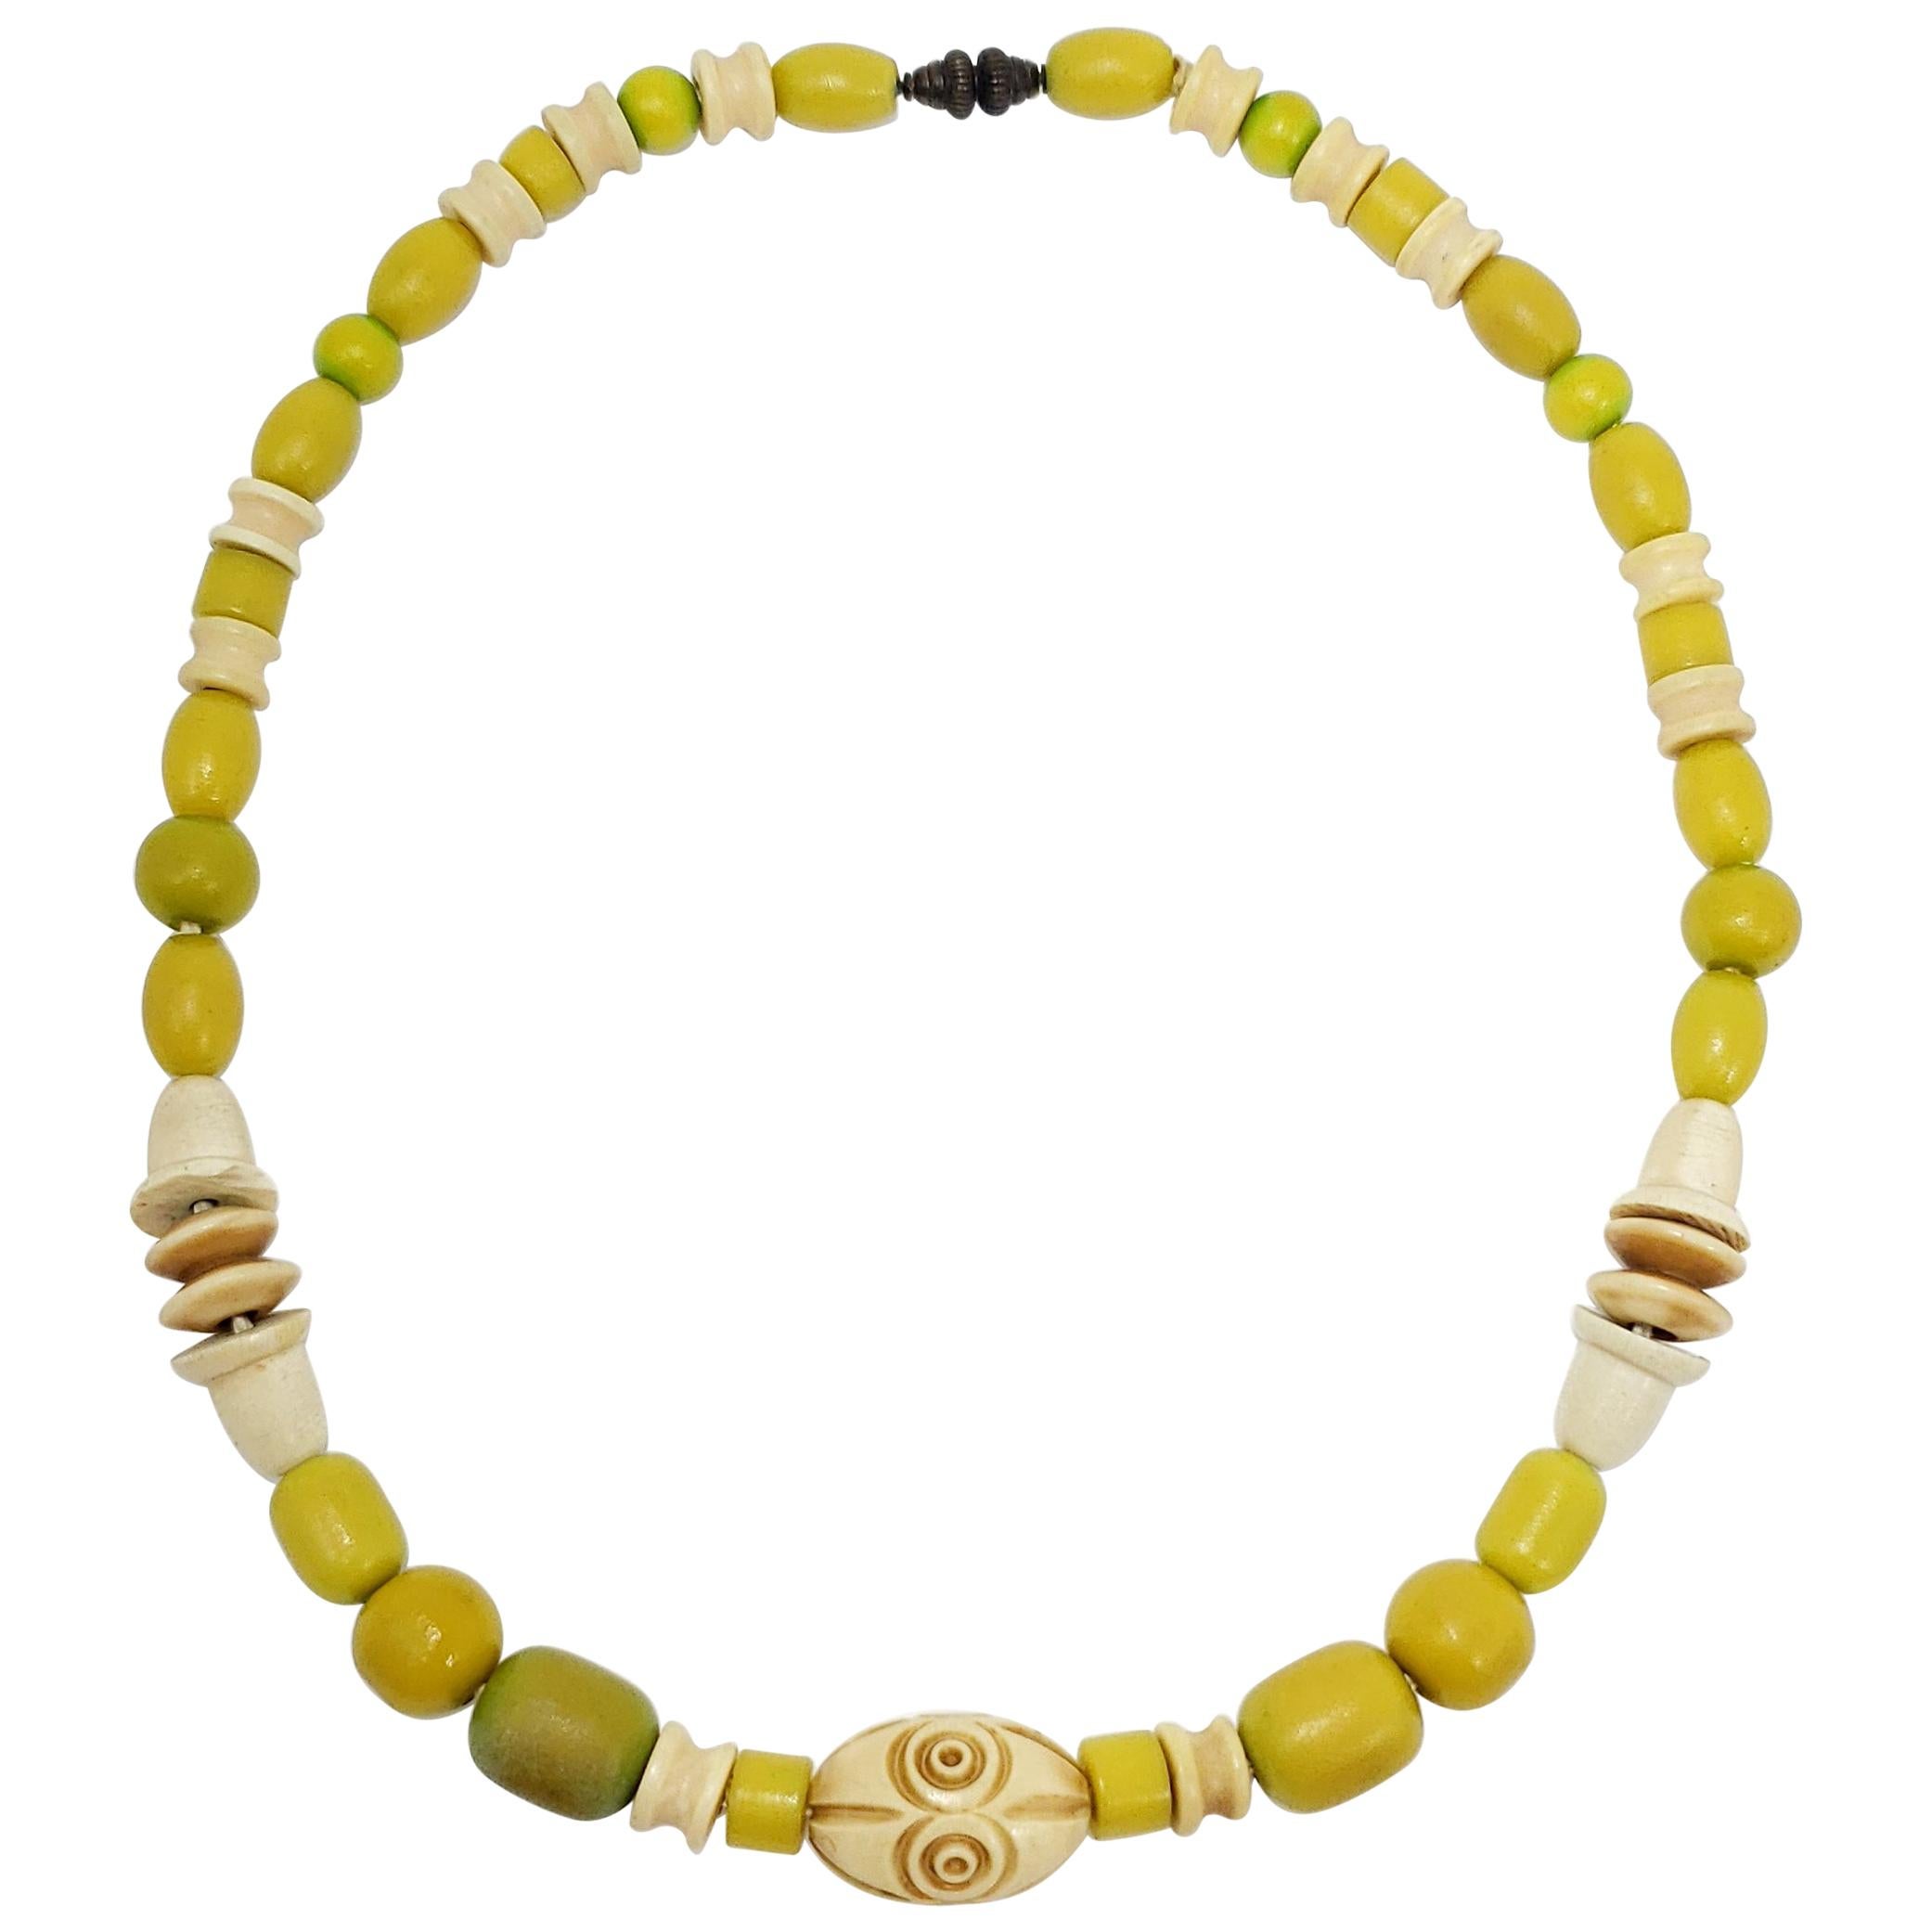 Apple Green and Cream Colored Carved Bakelite Bead Necklace, Brass Tone Clasp